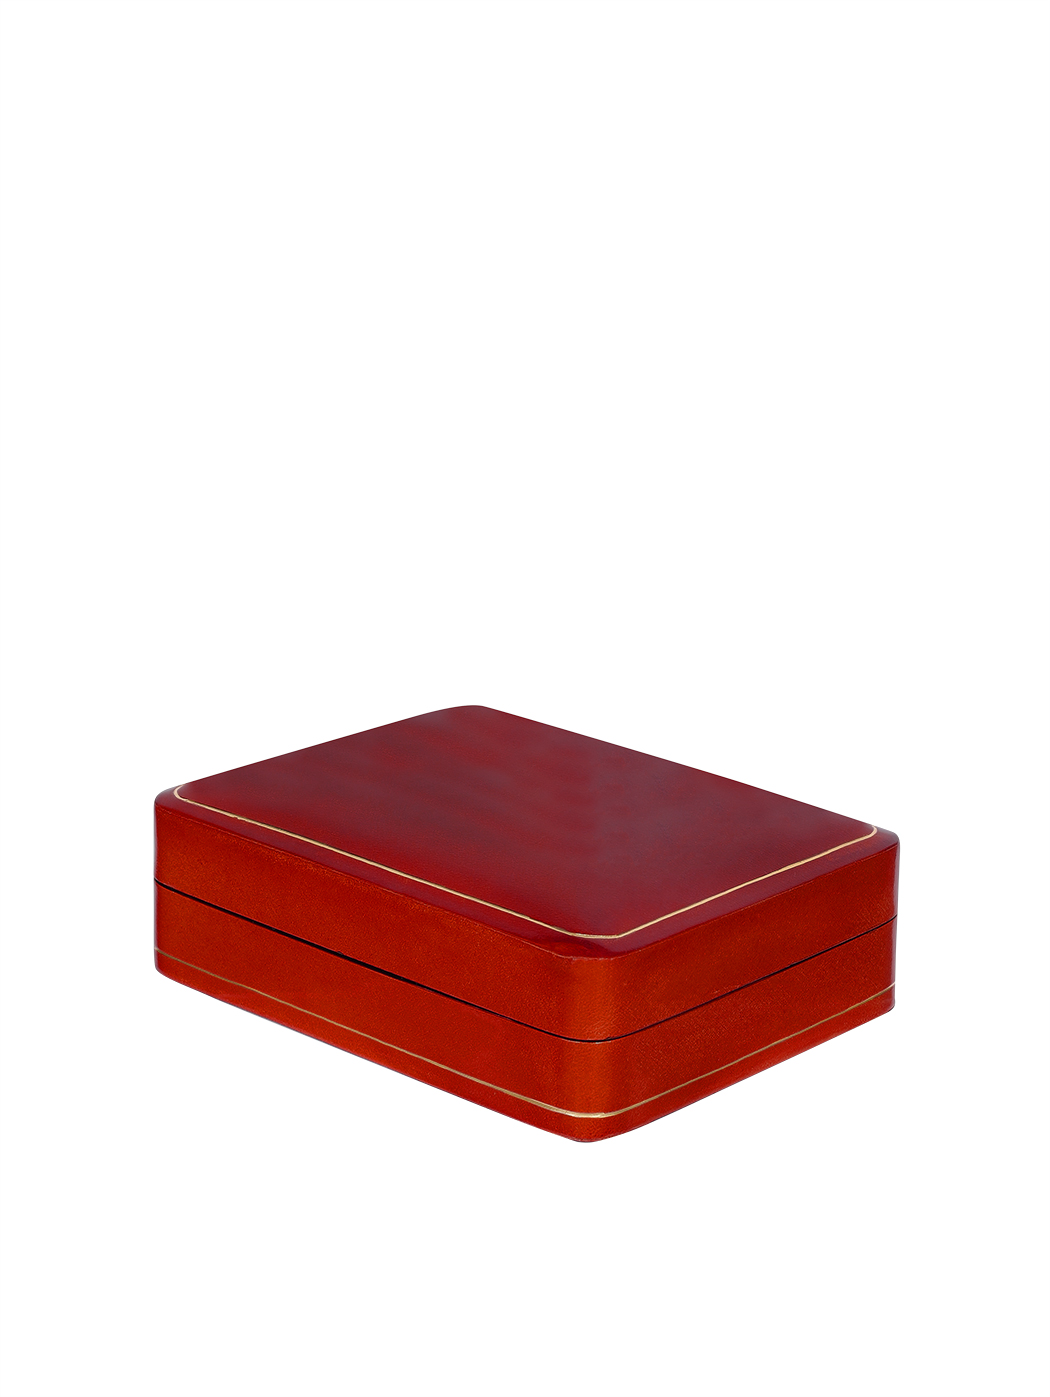 Large Decorative Box Wet Formed Leather Red